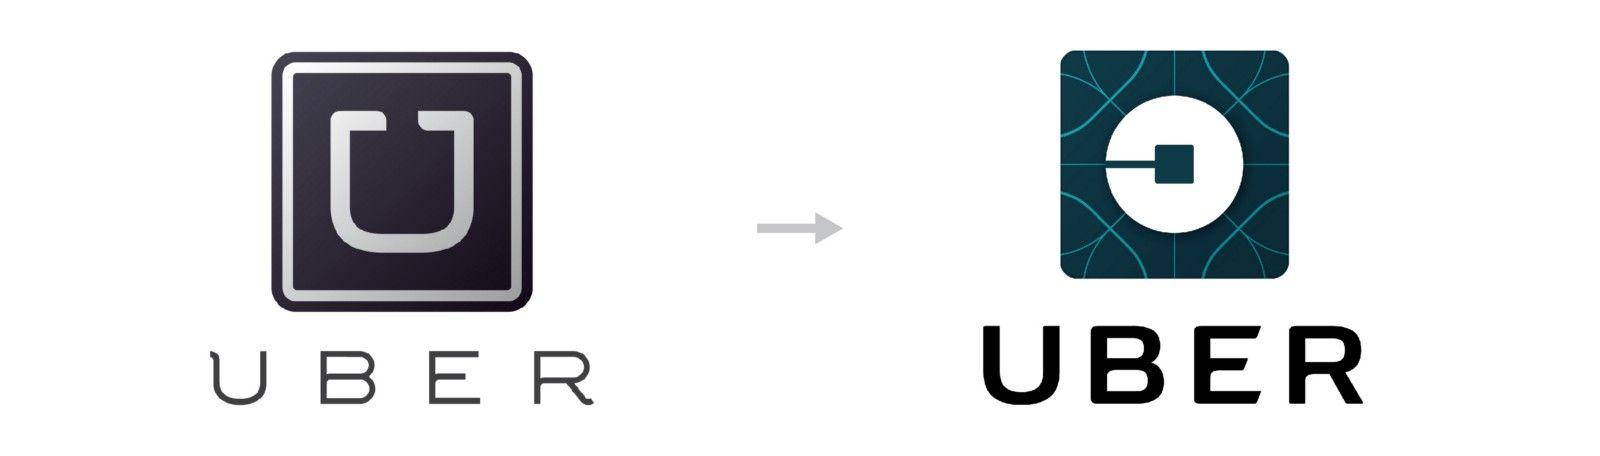 Uber Logo - A Closer Look at the 2016 Uber Redesign